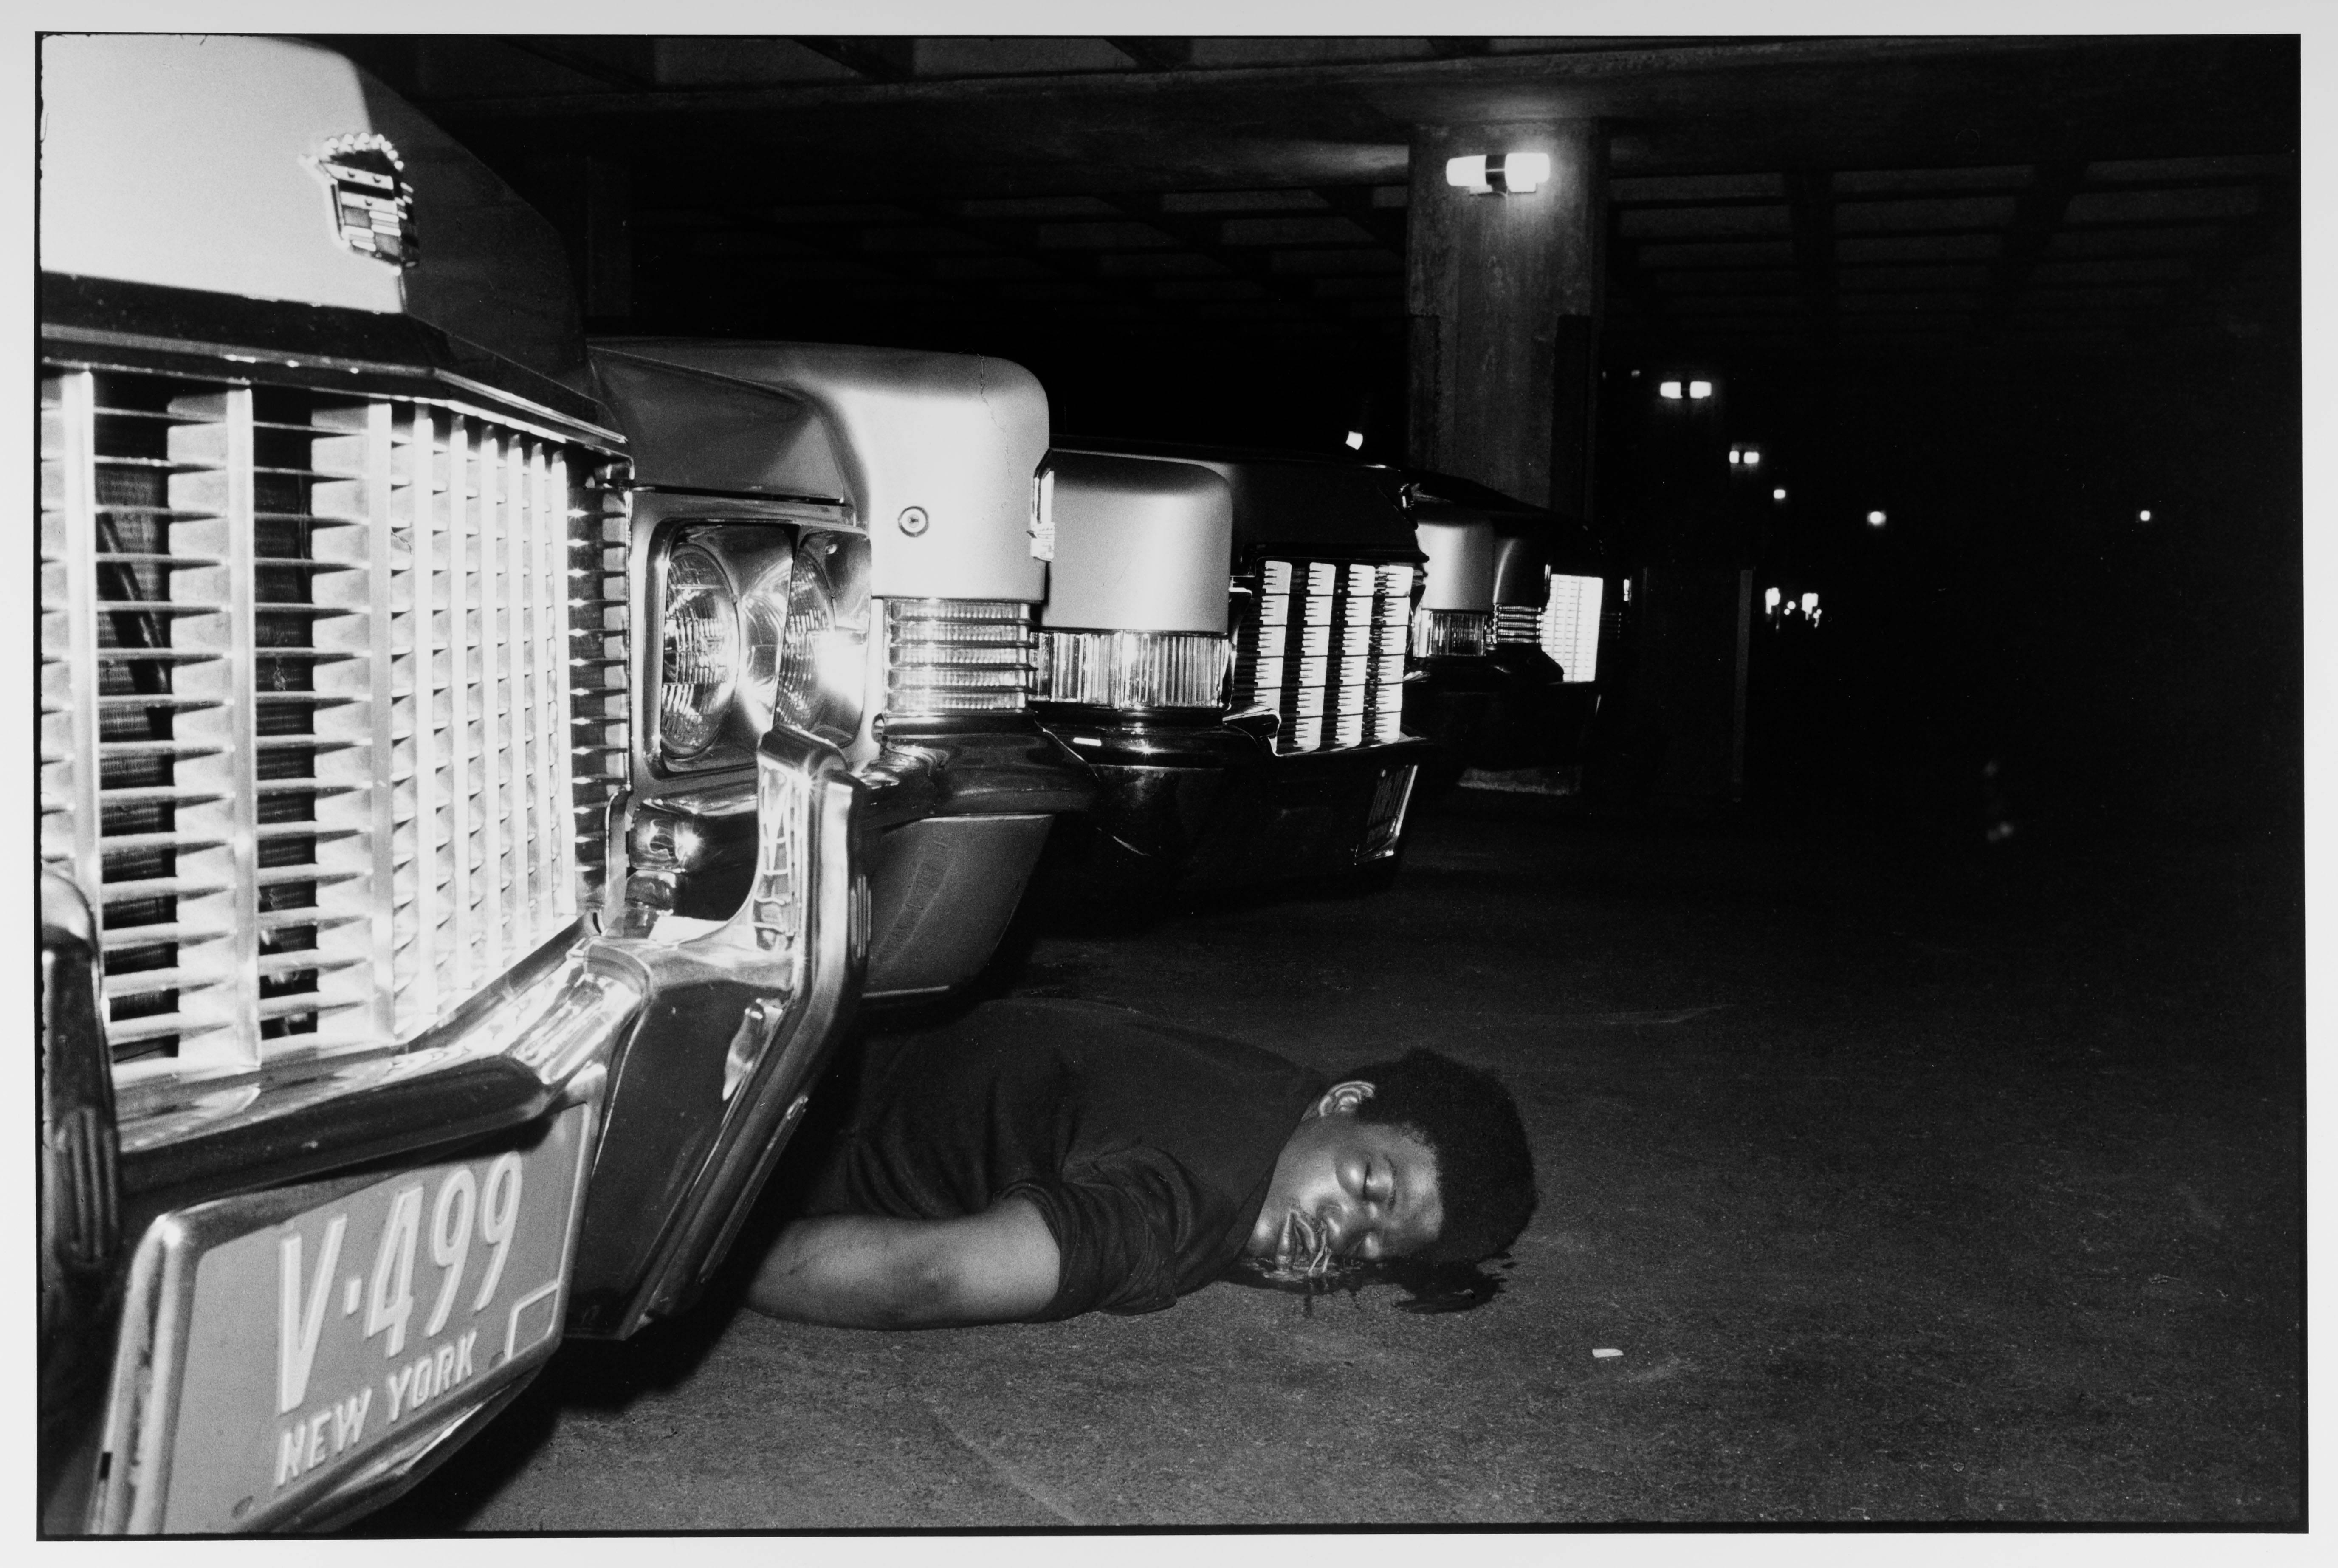 Leonard Freed Black and White Photograph - NYC (Police Work)